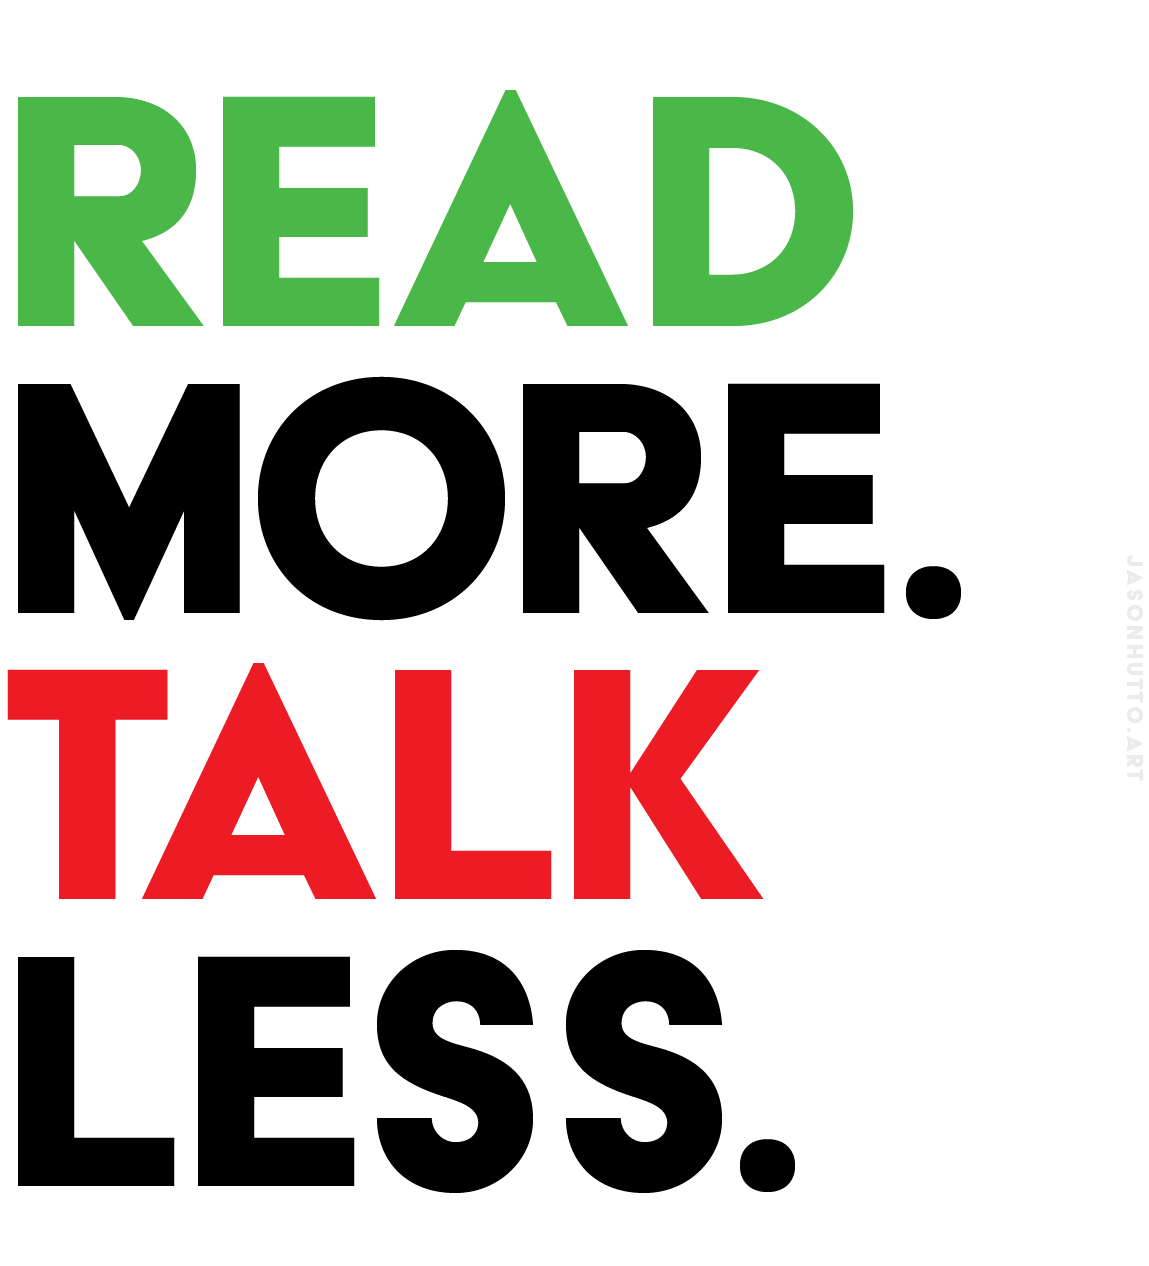 "Read More. Talk Less." 4-inch Sticker (5-Pack)